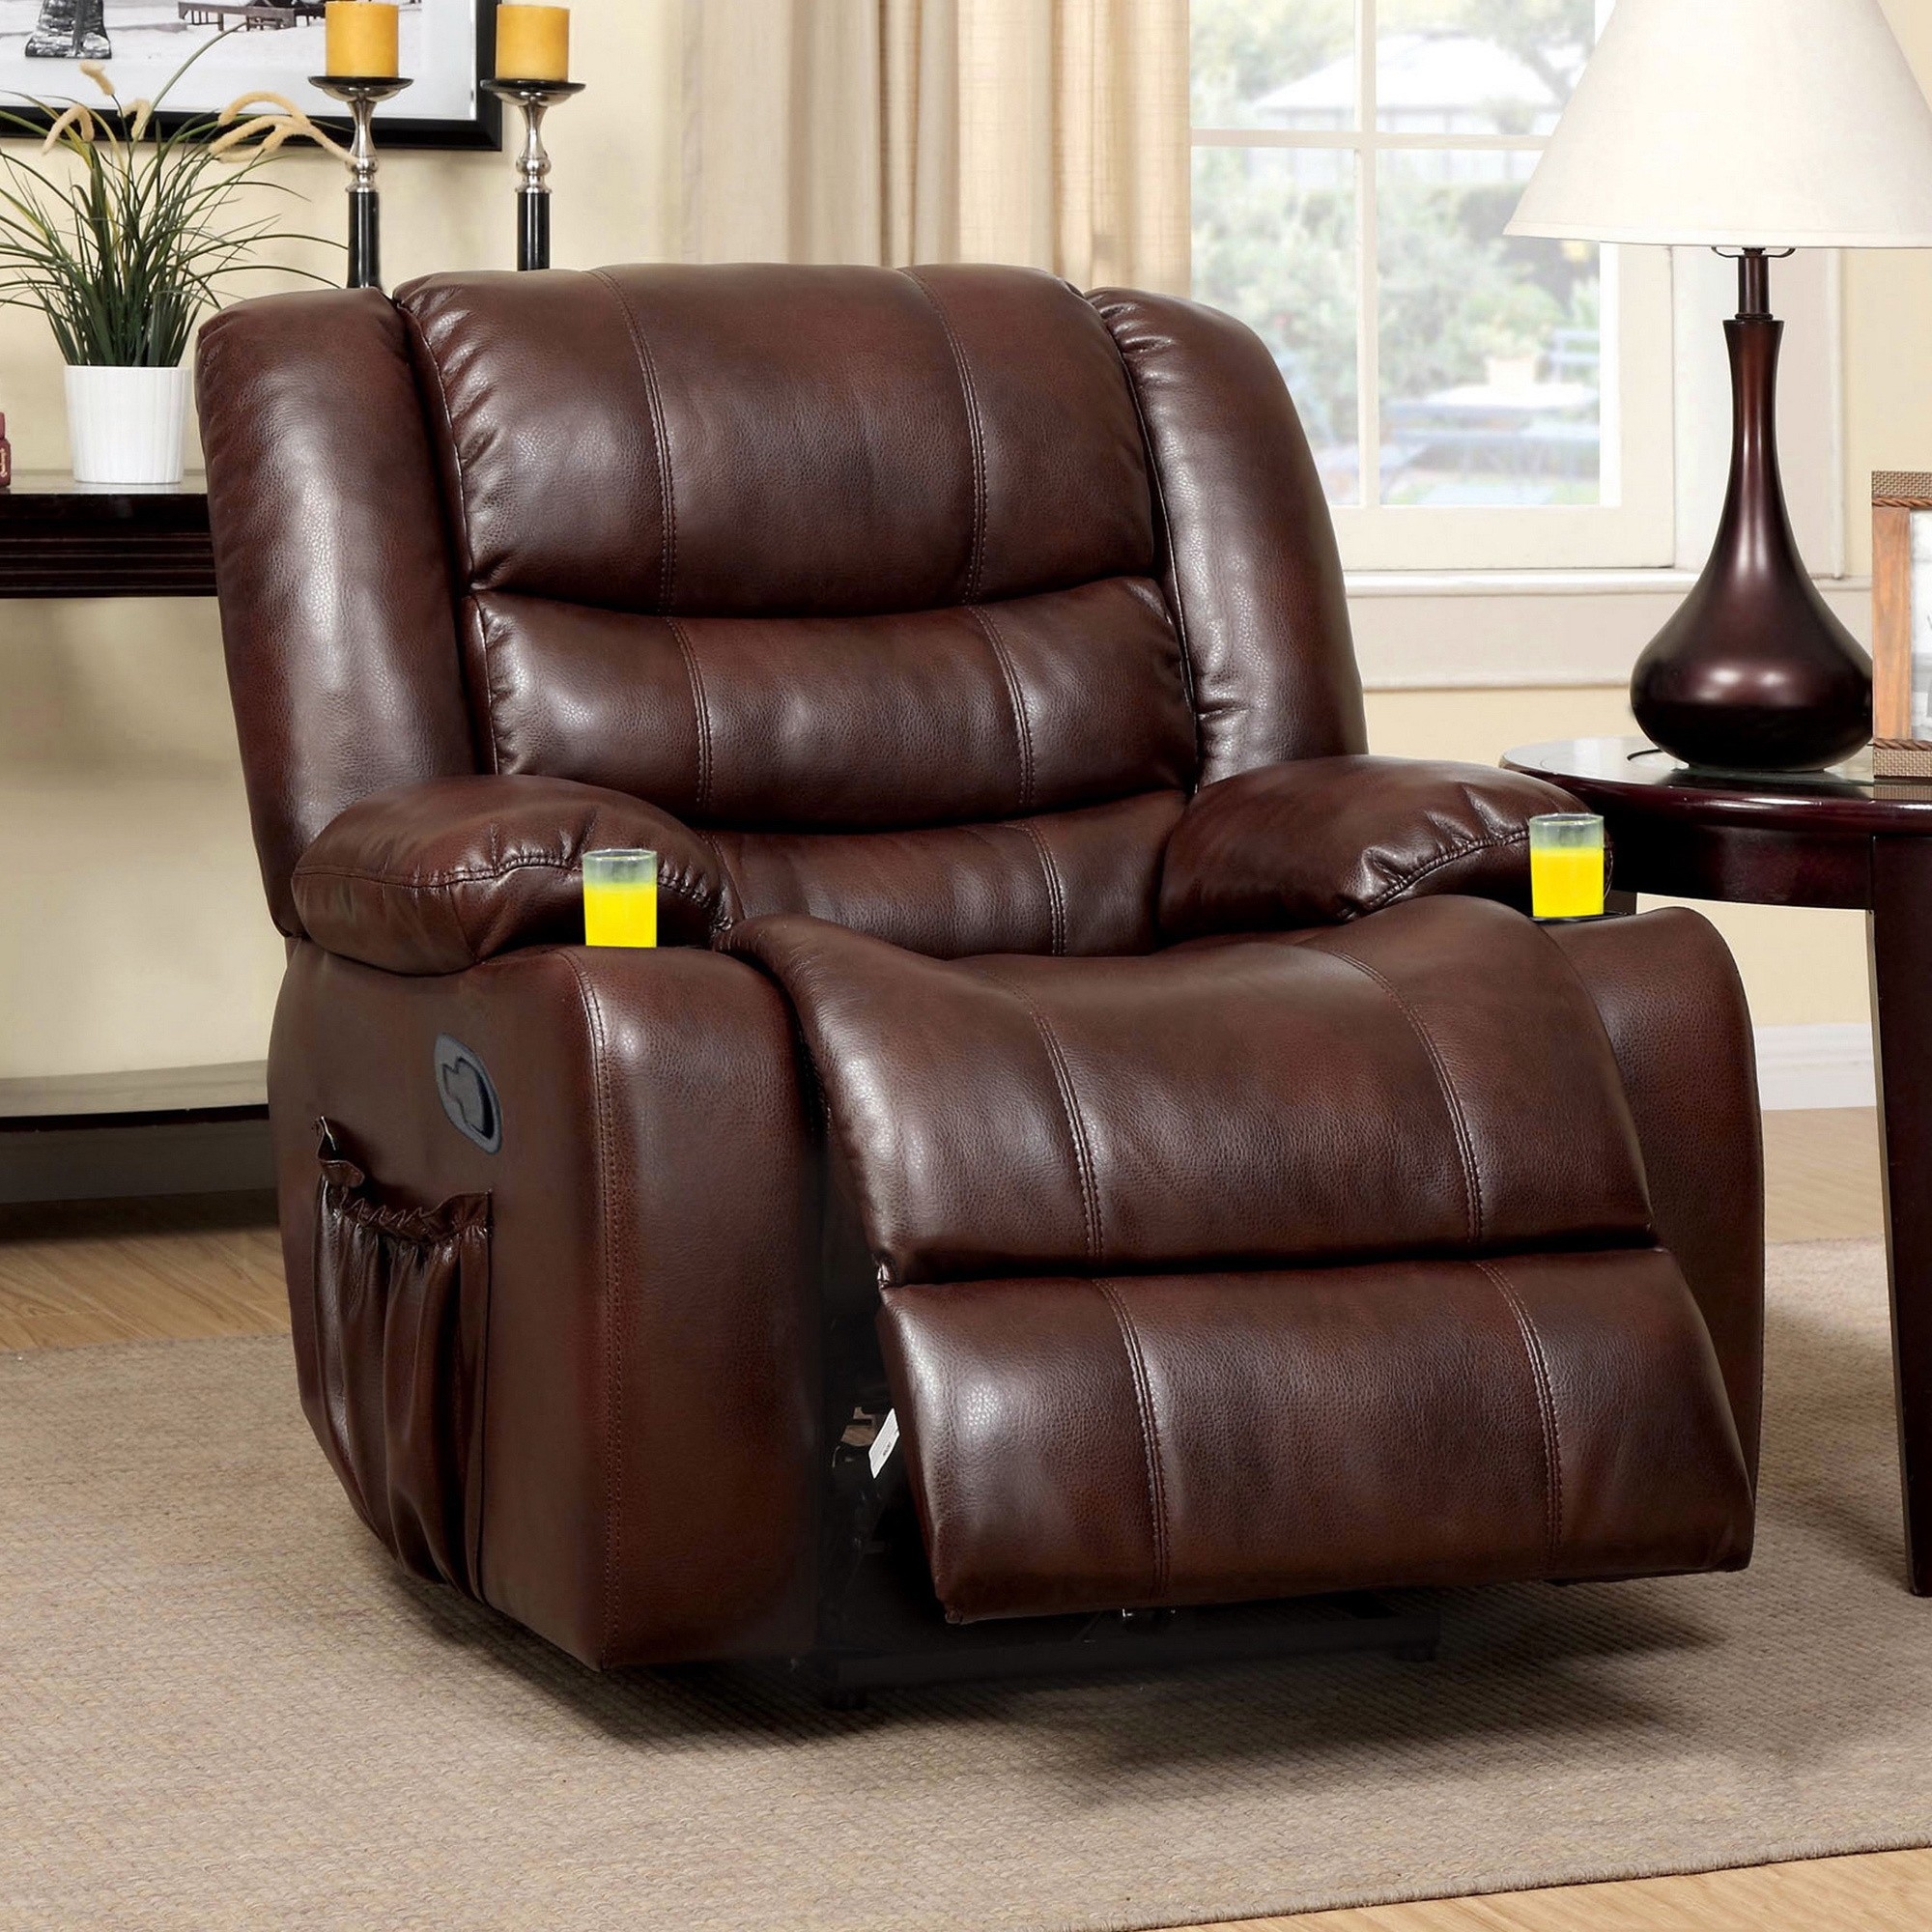 https://foter.com/photos/title/leather-recliners-with-cup-holders.jpg